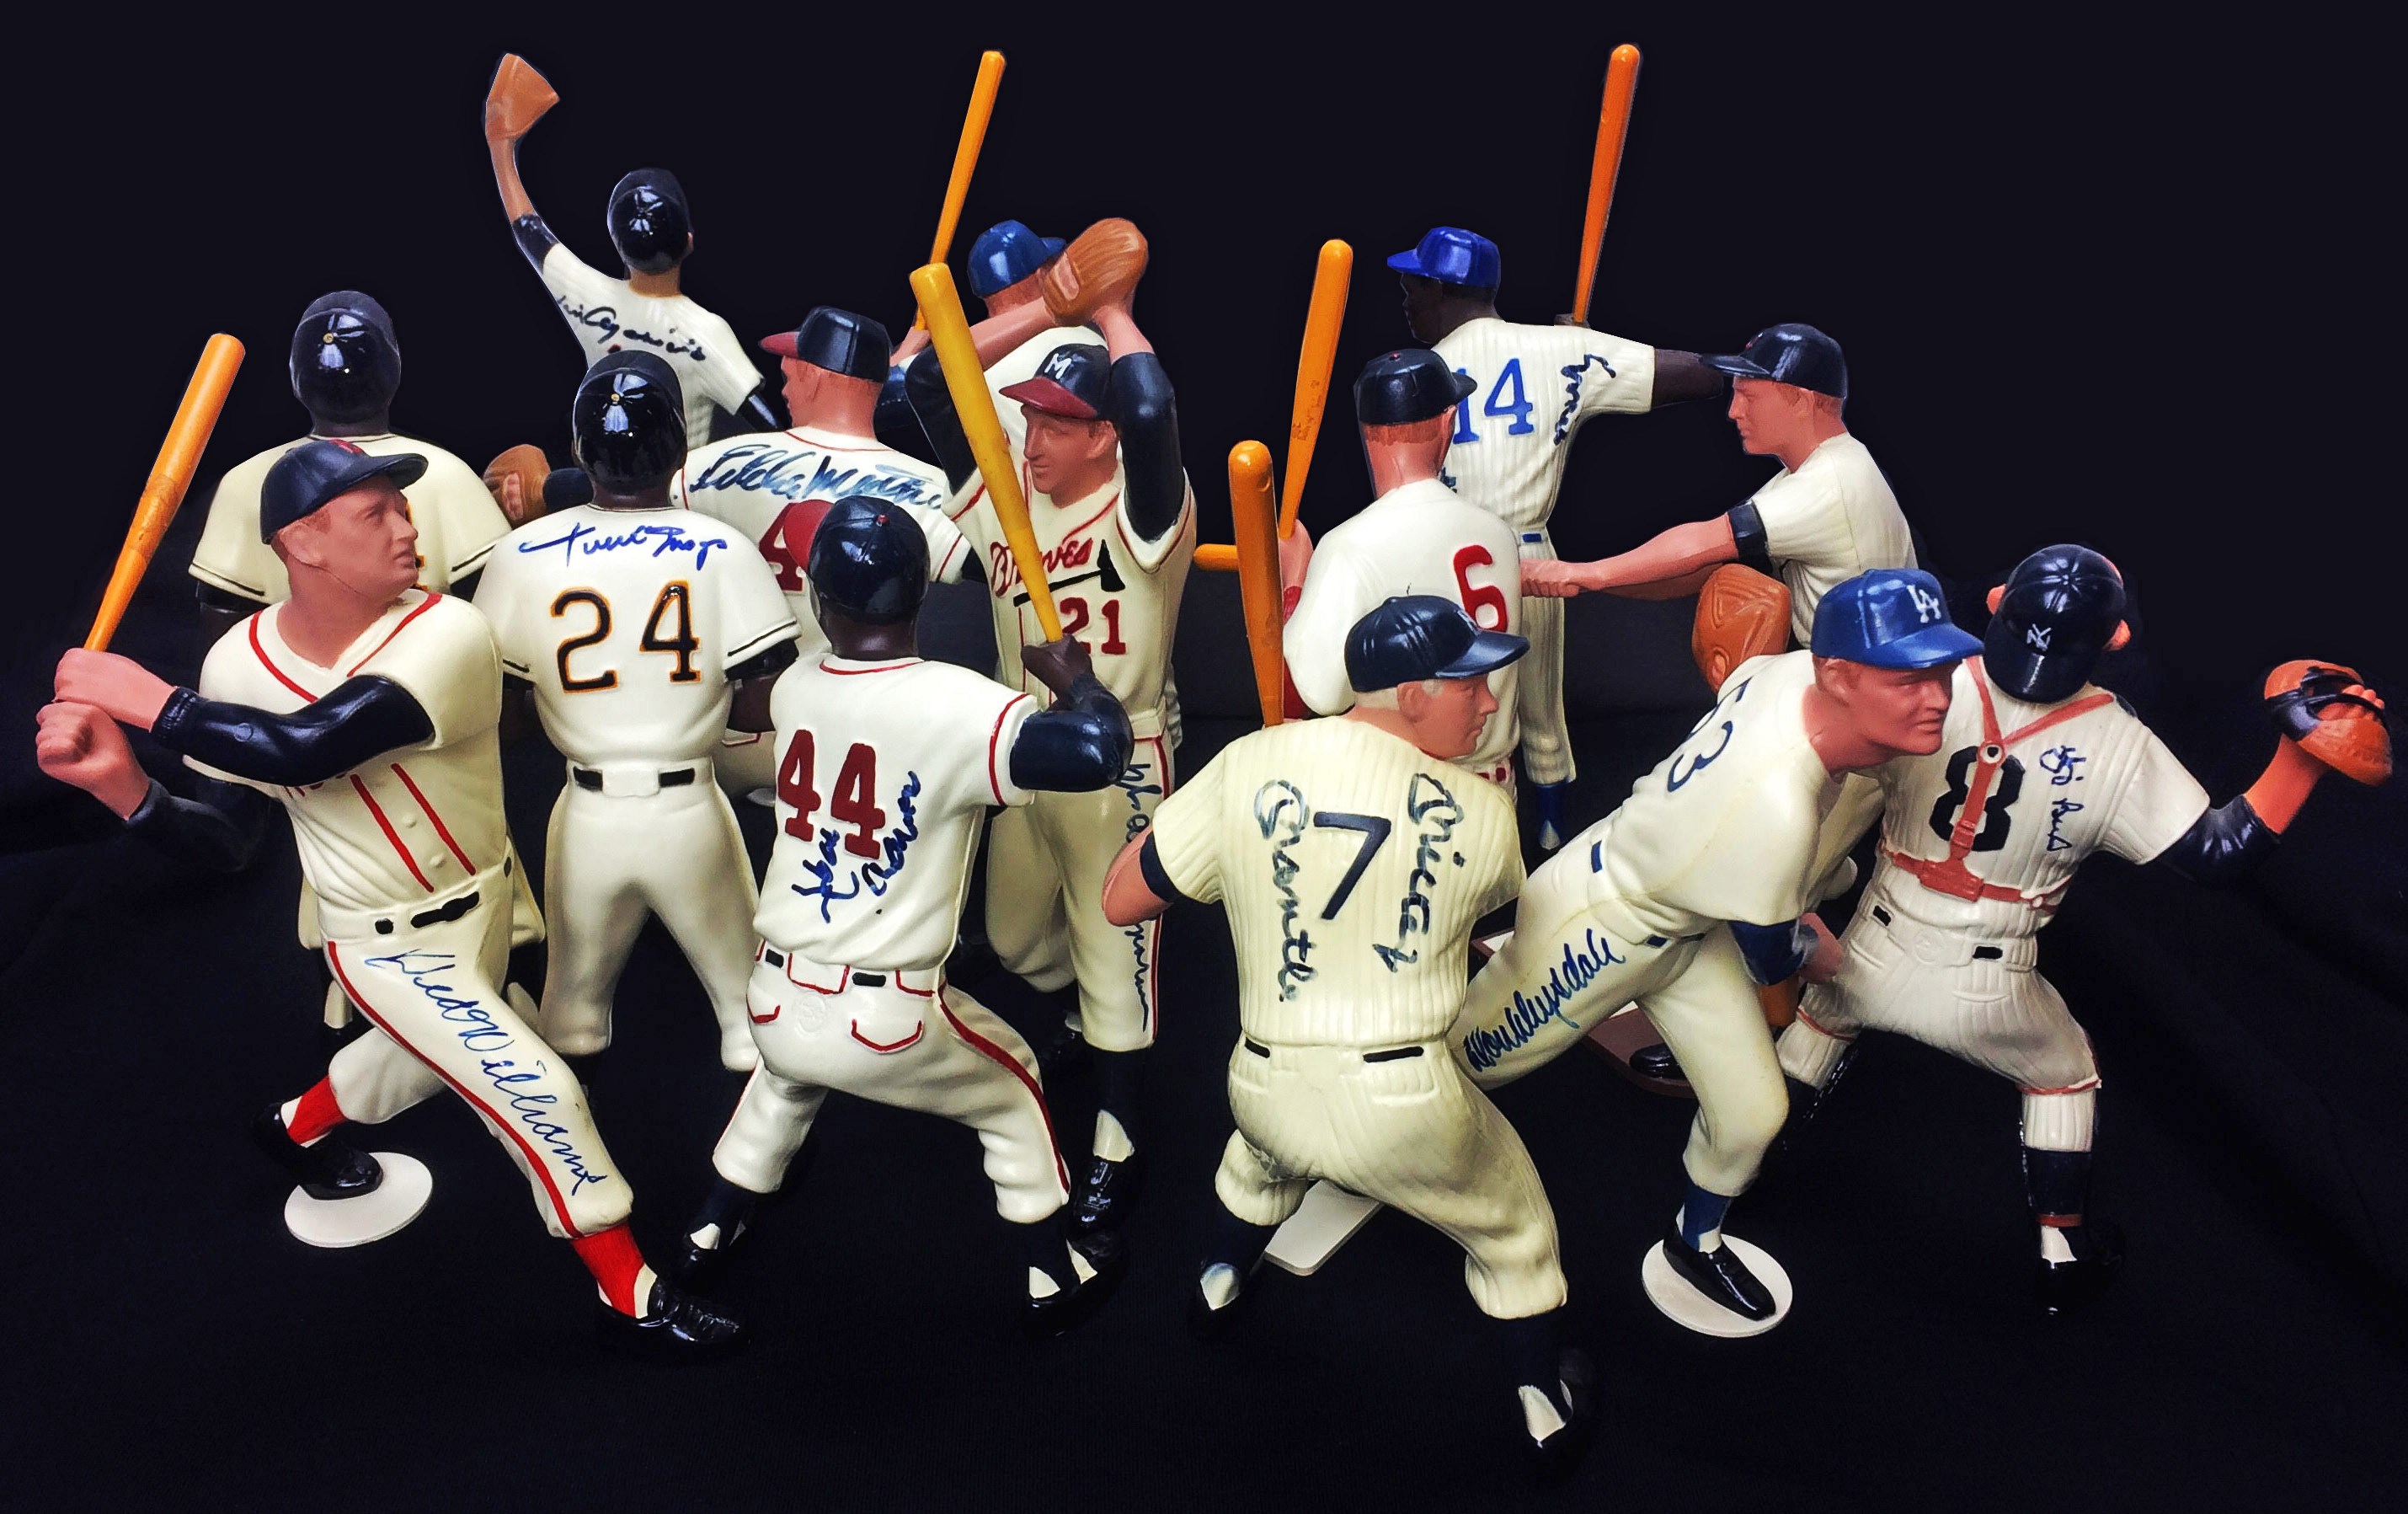 Beautiful 25th Anniversary Hartland Statues Complete Set - 15 Signed with Mantle & Williams (21)